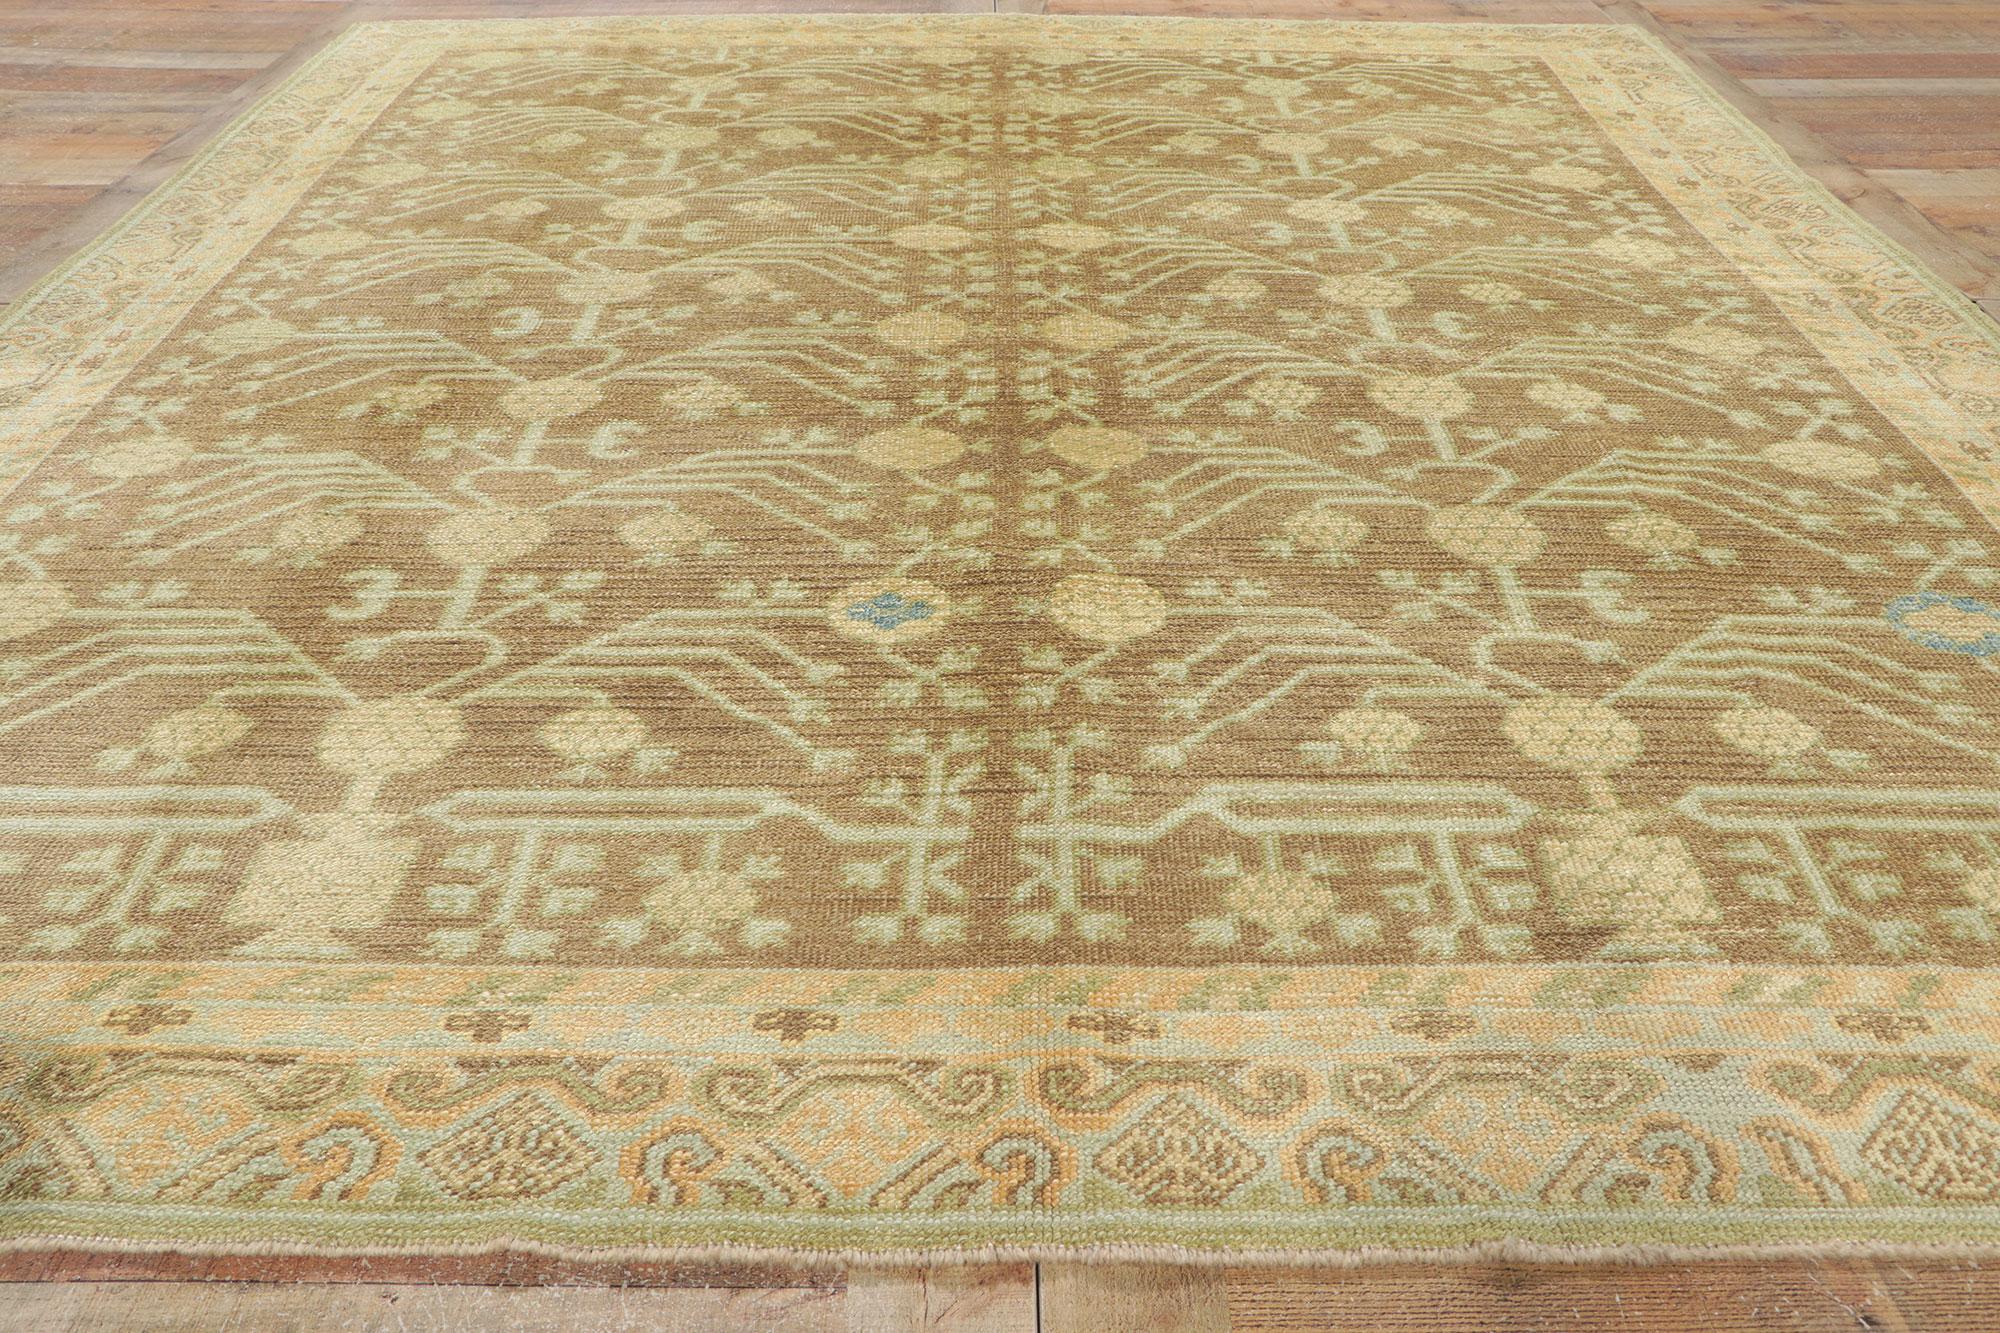 New Turkish Khotan Rug with Earth-Tone Colors For Sale 2